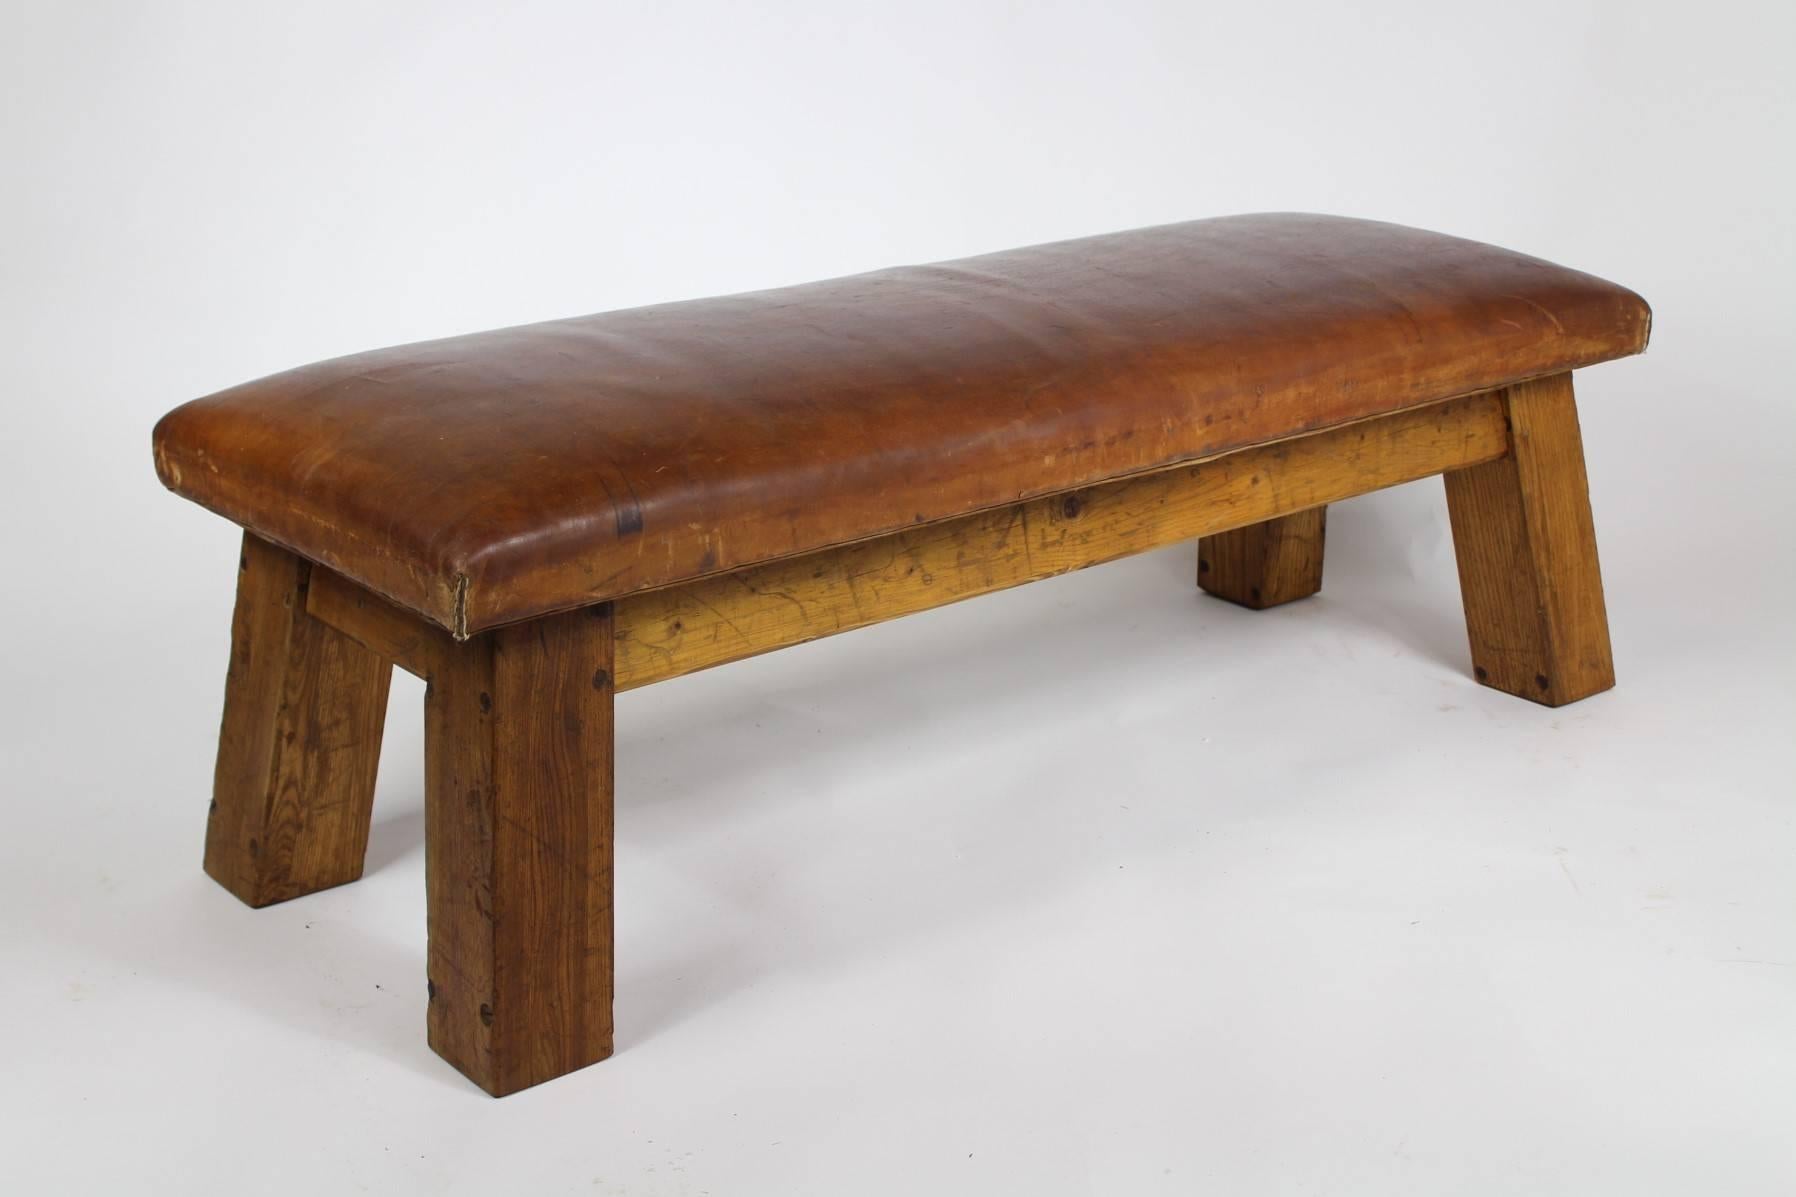 Leather gym bench from the 1950s. It is in very good original condition with nice patina.